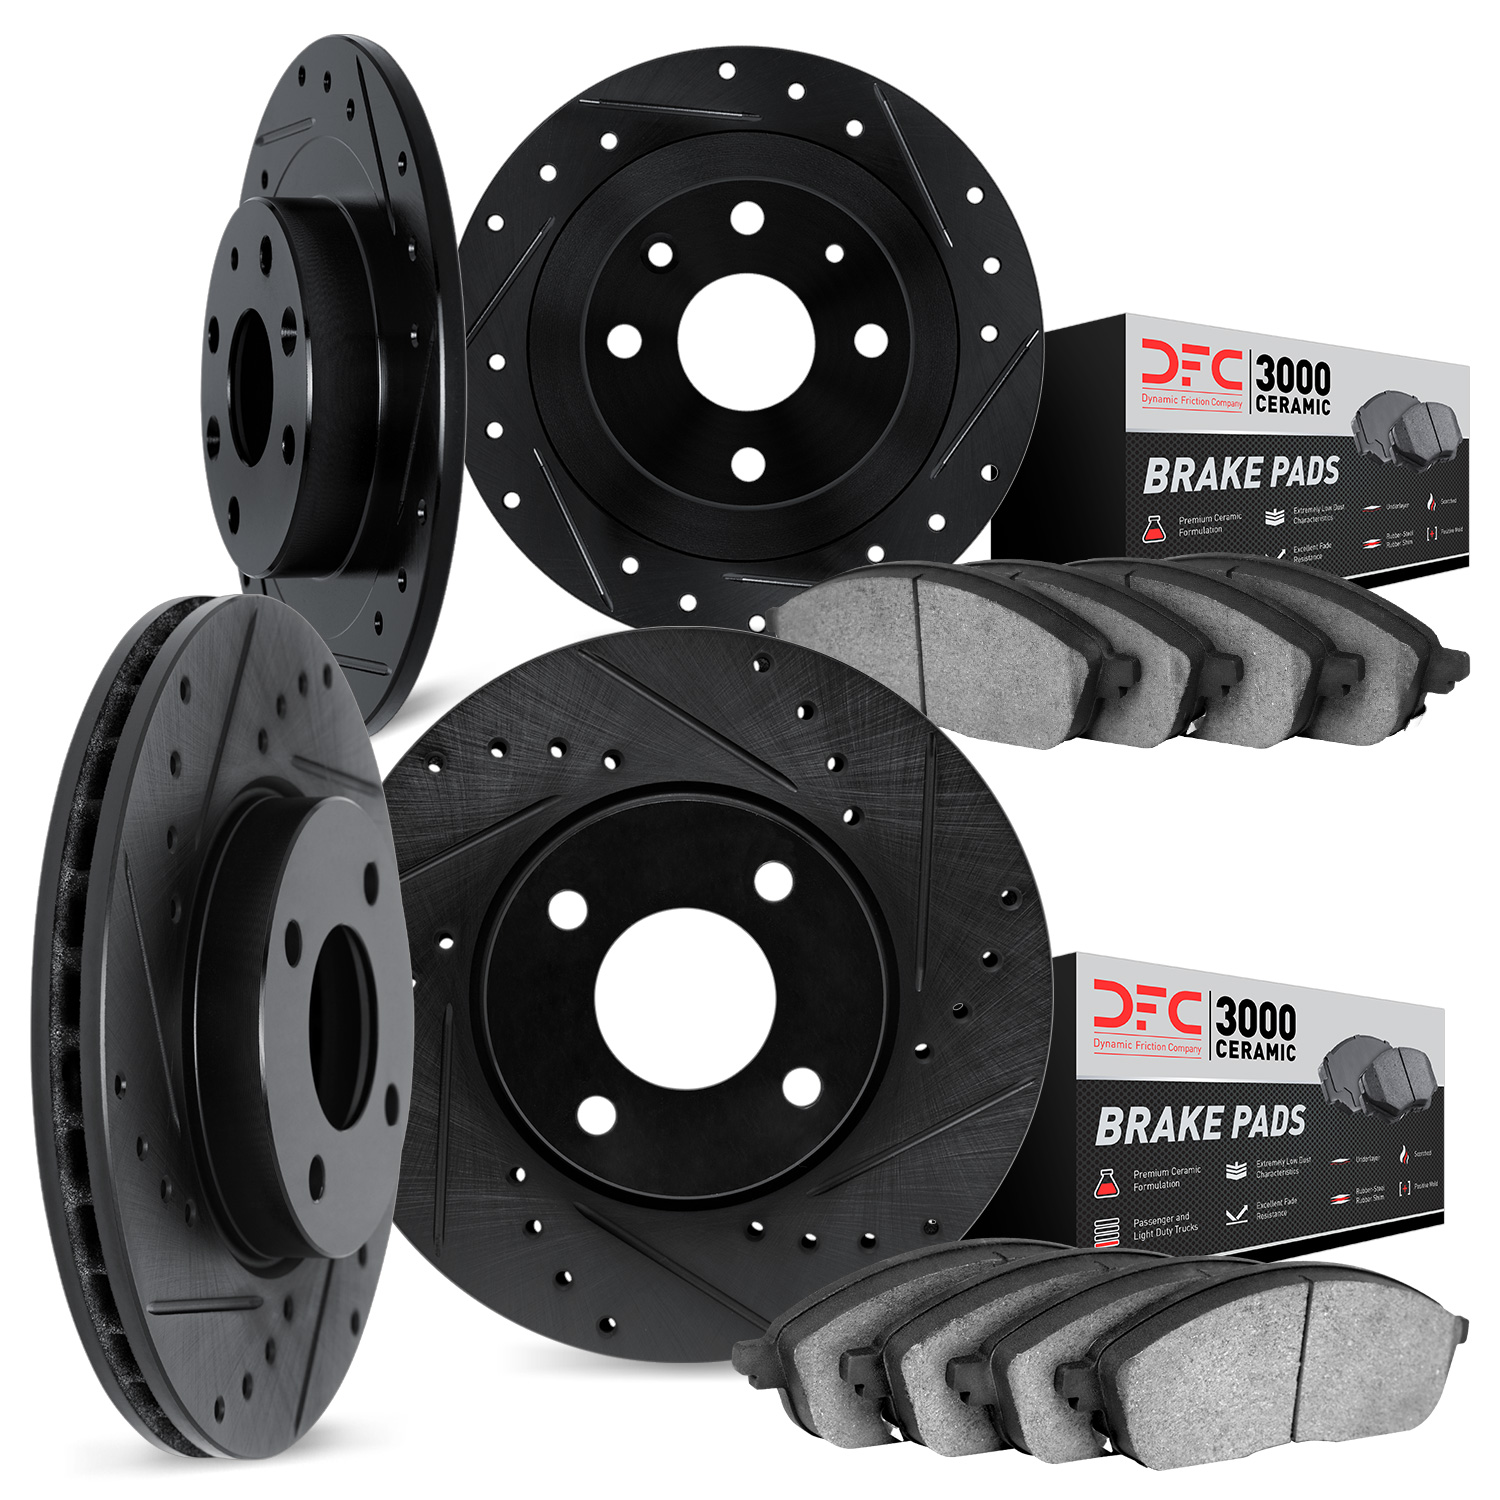 8304-59065 Drilled/Slotted Brake Rotors with 3000-Series Ceramic Brake Pads Kit [Black], 1998-2002 Acura/Honda, Position: Front